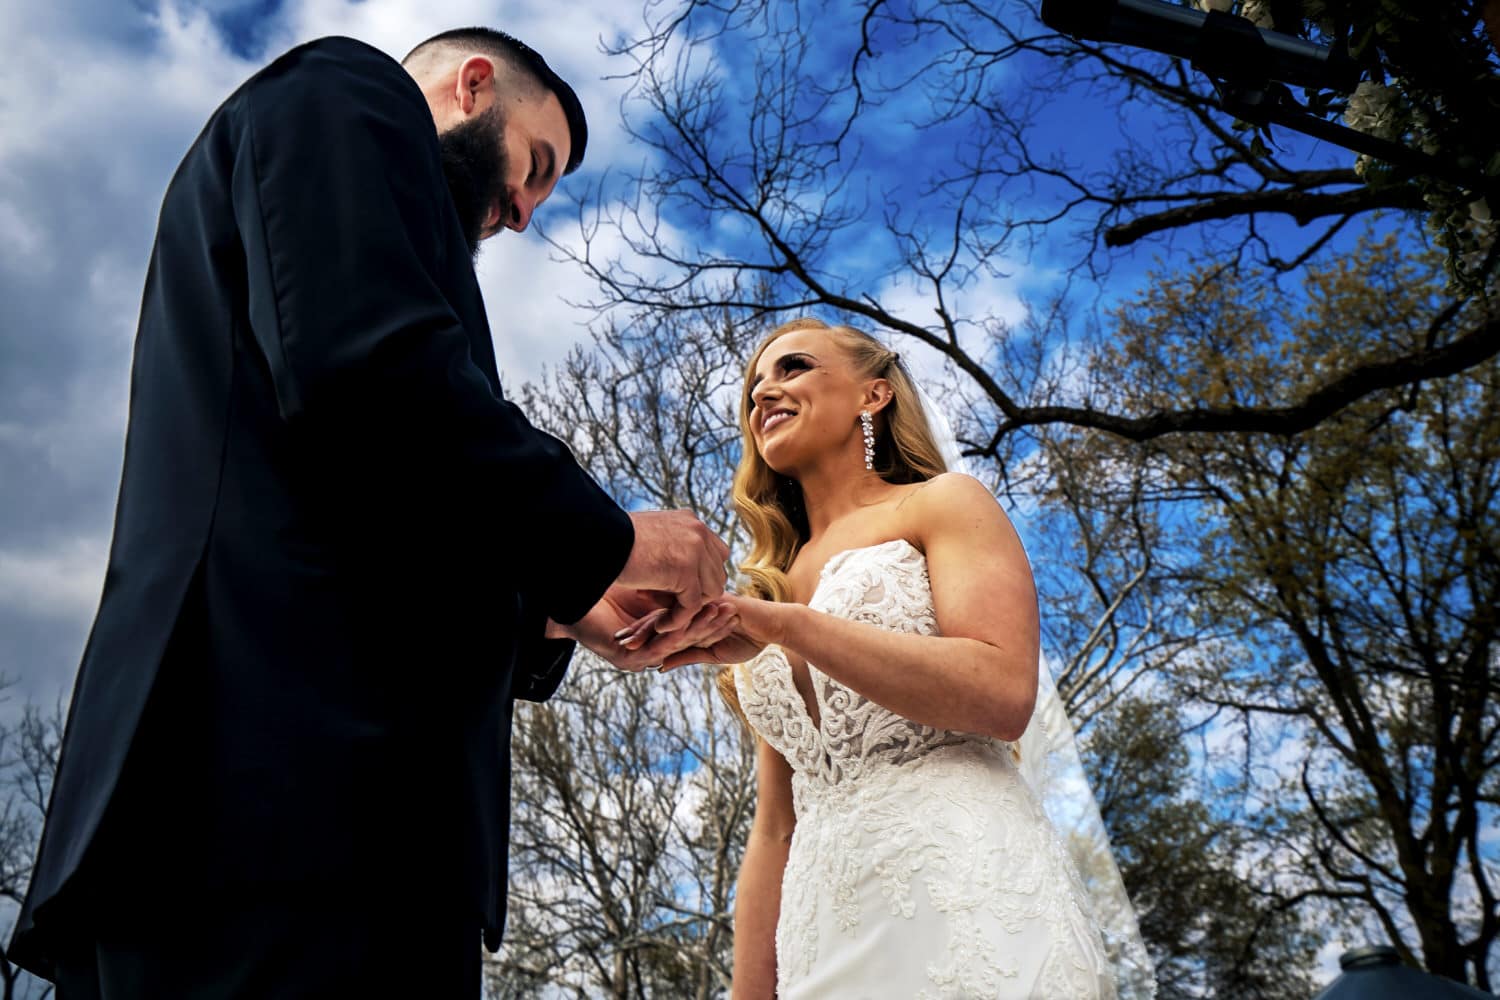 A candid picture taken during a spring wedding ceremony at the Farmhouse KC Event Venue of a groom putting a wedding band on his bride's finger, taken from the ground looking up against a bright blue sky. 